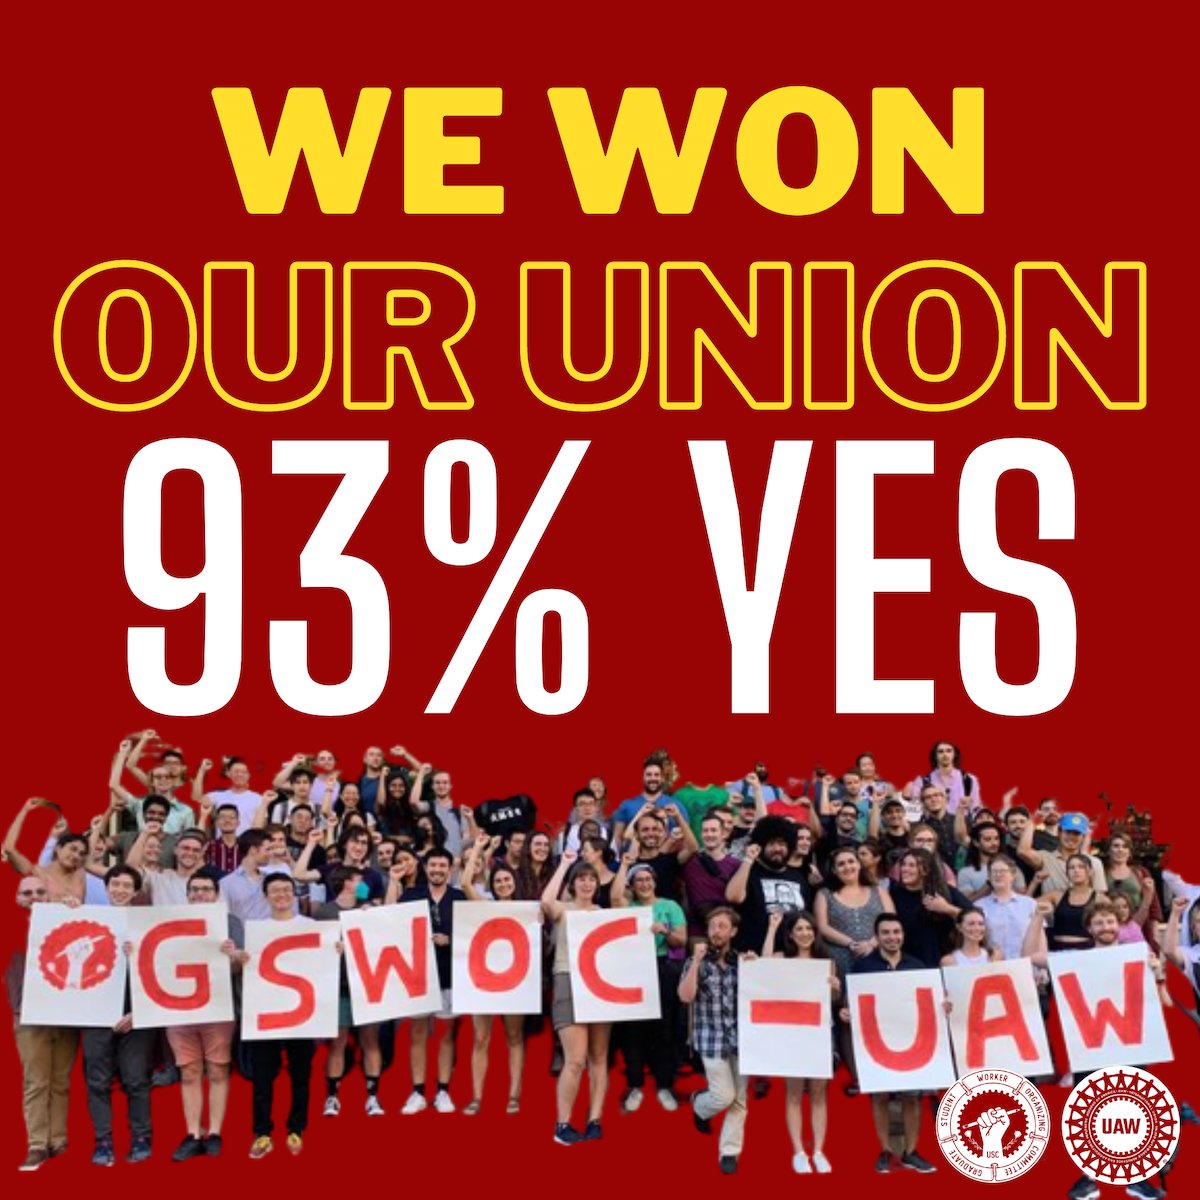 WE WON OUR UNION! The votes are in. By an incredible 93% margin, a vote of 1599 Yes to 122 No, USC Graduate Student Workers have voted resoundingly in favor of forming our union, GSWOC-UAW!